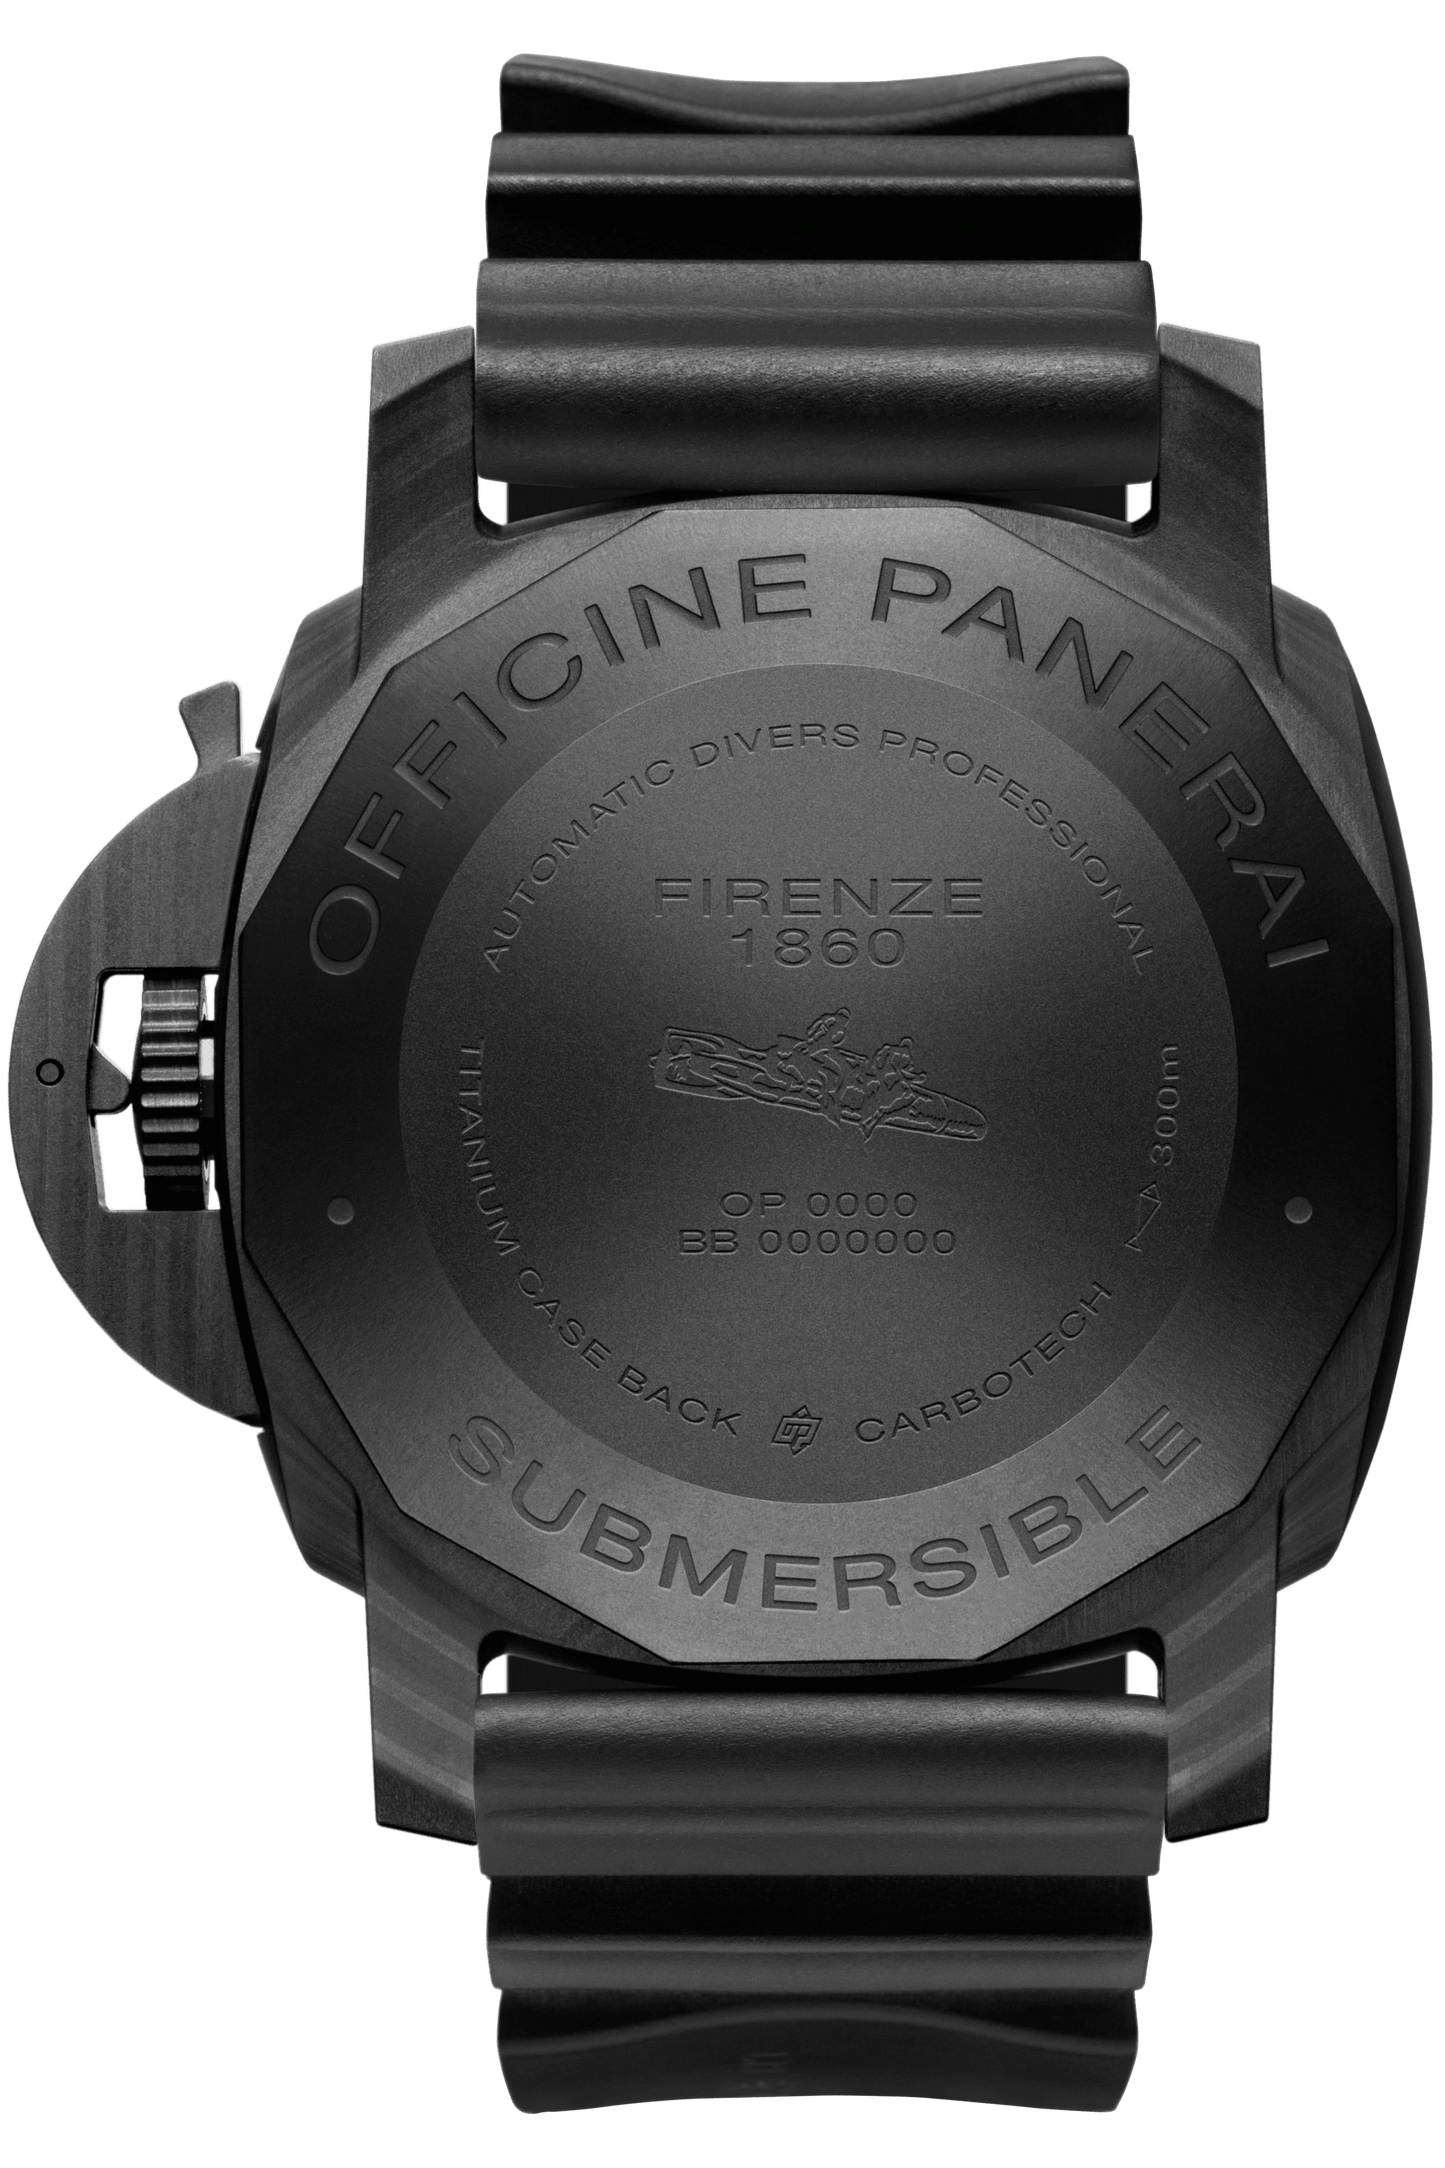 Panerai Submersible Carbotech™ - 47mm, Ref# PAM01616, Back